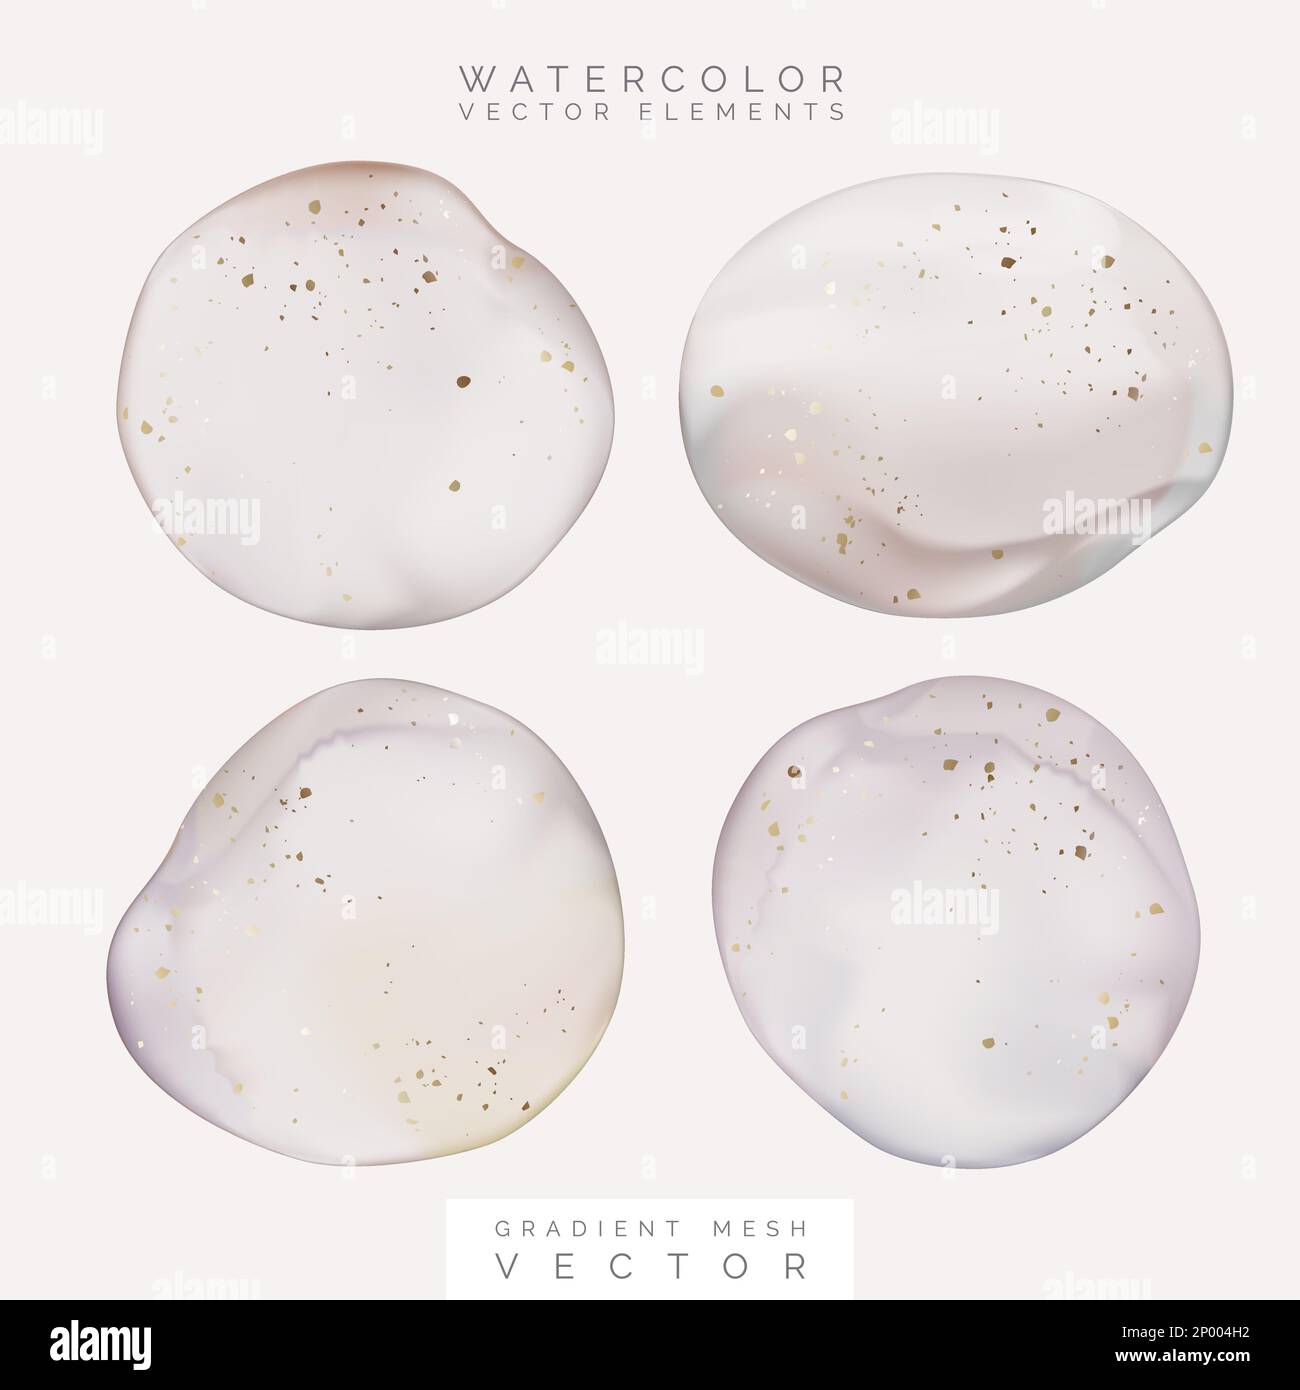 Gradient Mesh Vector Watercolor Minimal Abstract Drawing or Drop with Gold Foil Effect. Pastel Purple, Cream and Beige Colors. Stock Vector